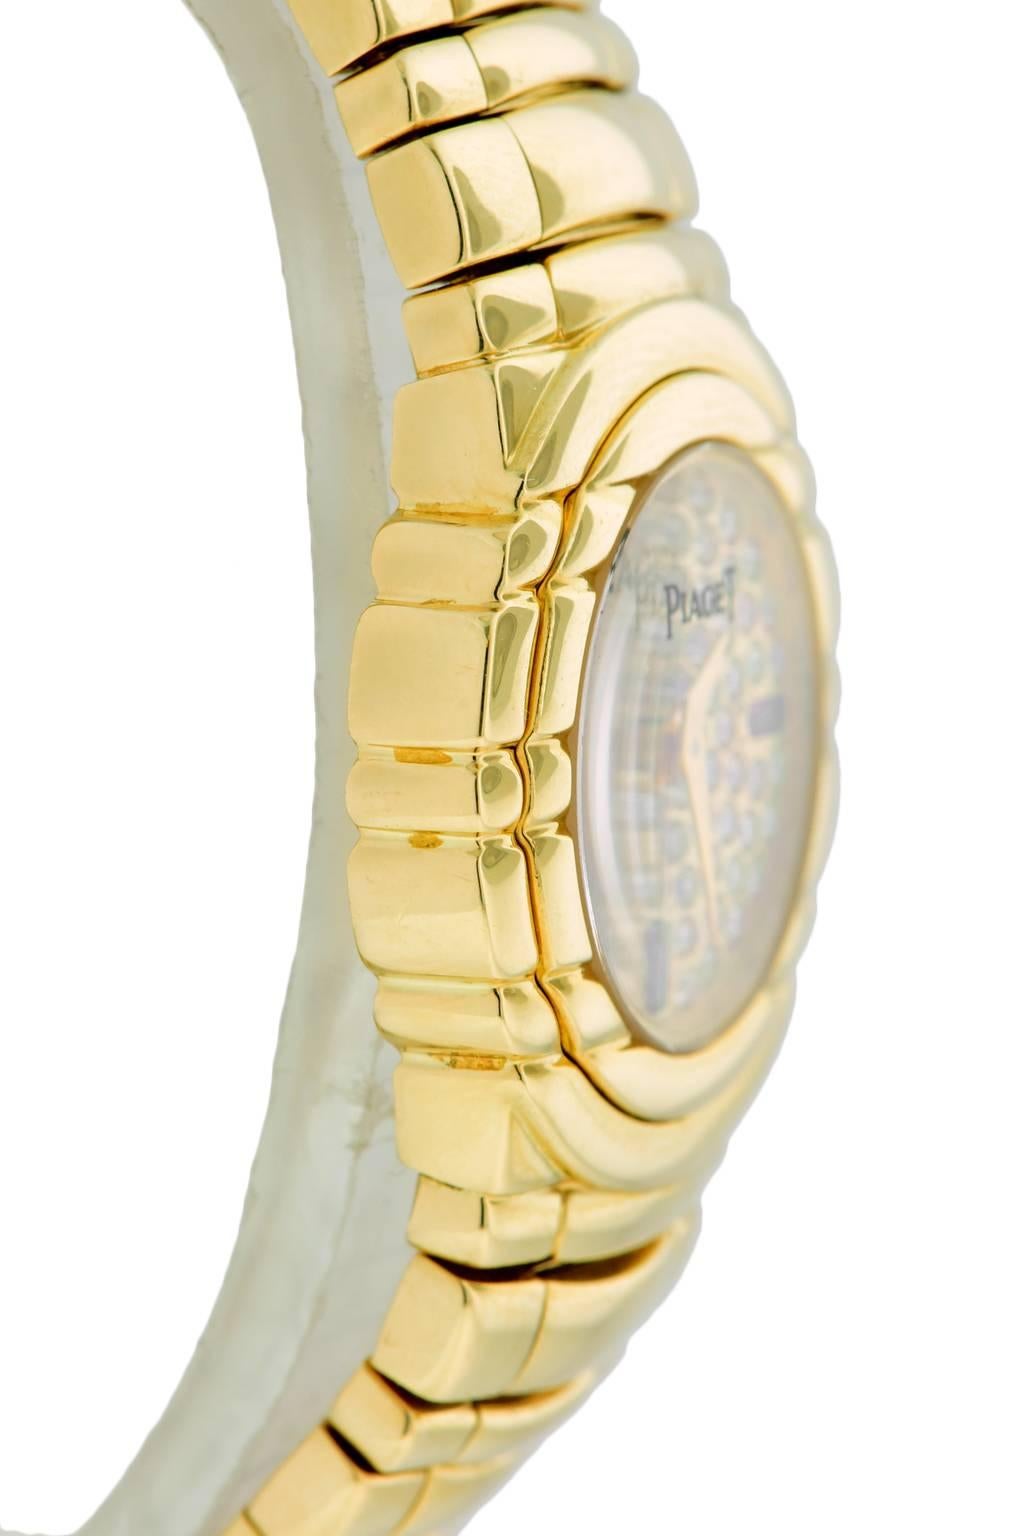 Piaget Lady's Yellow Gold Diamond Ruby Tanagra Quartz Wristwatch In Excellent Condition For Sale In Hartsdale, NY